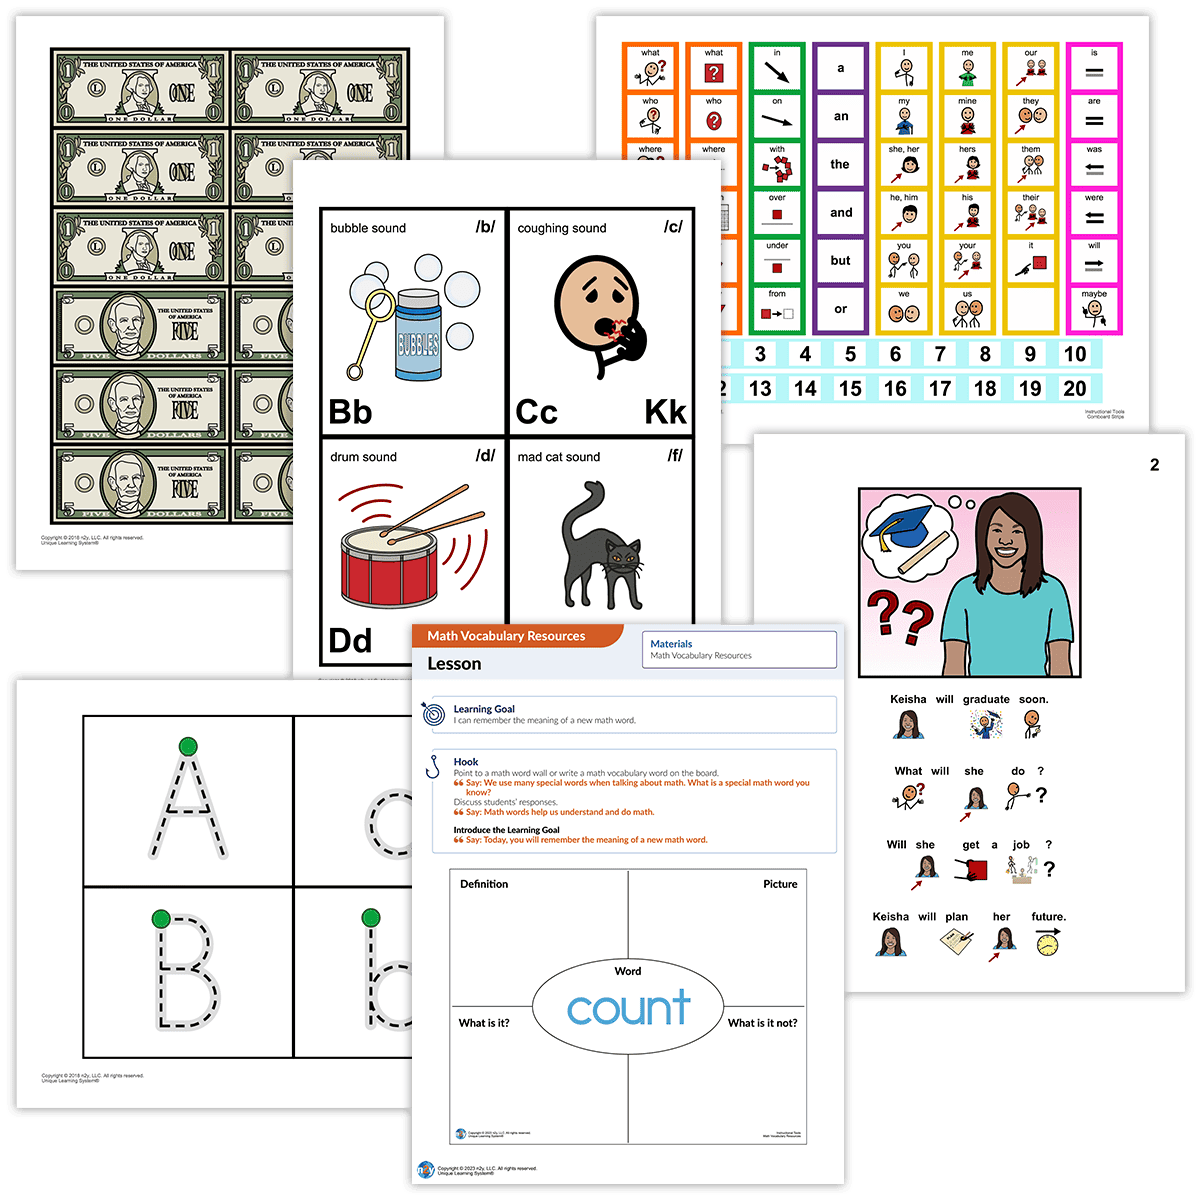 Examples of manipulatives, printable templates, and differentiated leveled books included as instructional tools